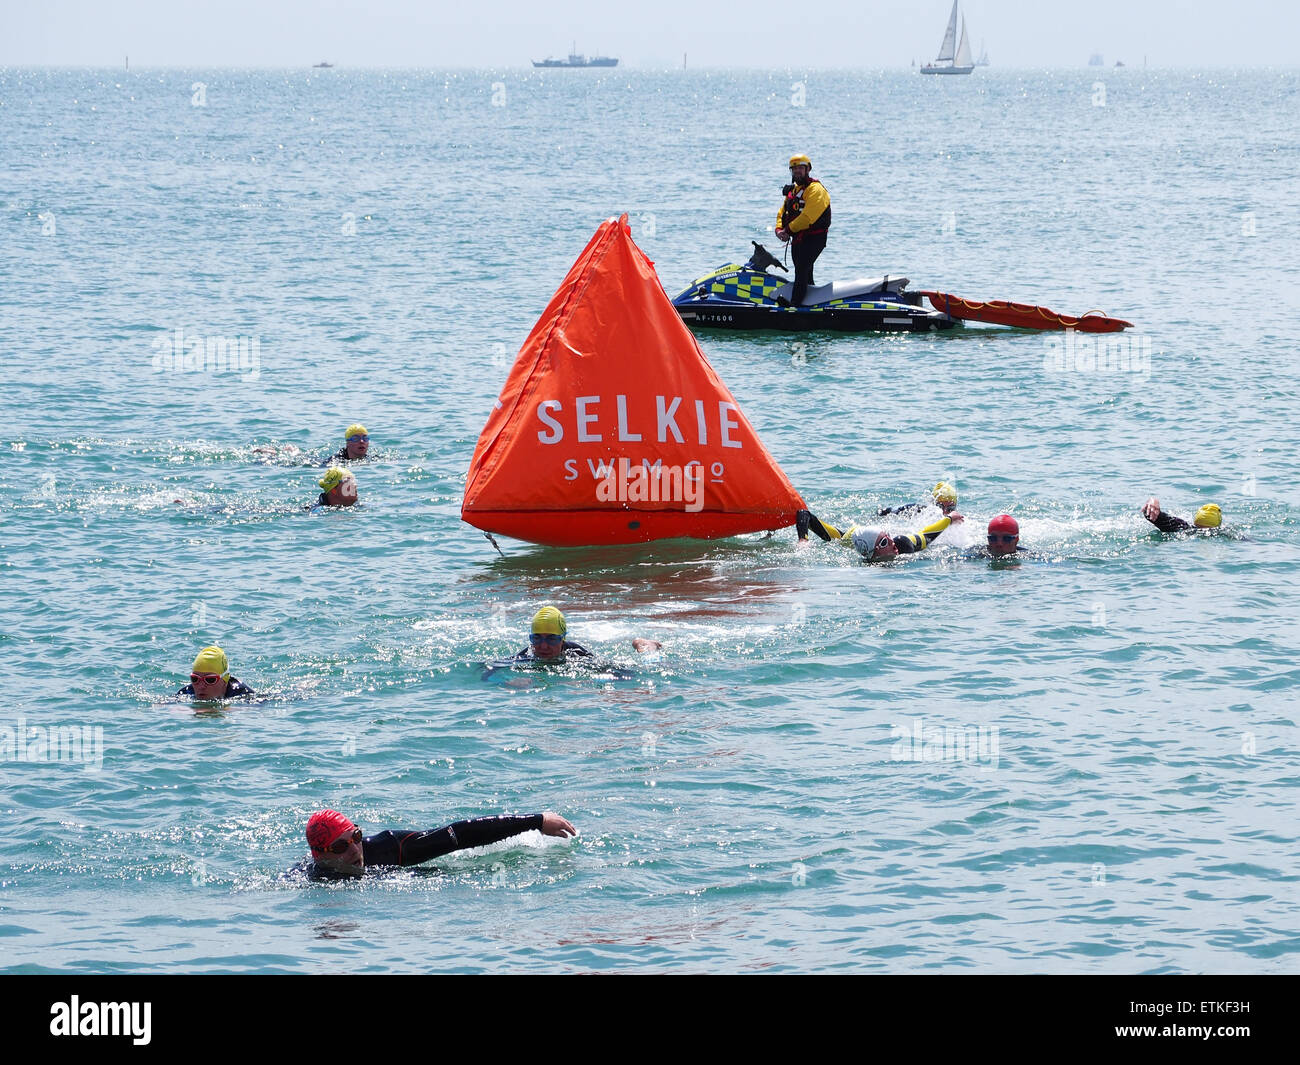 Competitors in a triathlon swim around a buoy in the Solent, watched over by a RLSS lifeguard on a jetski Stock Photo